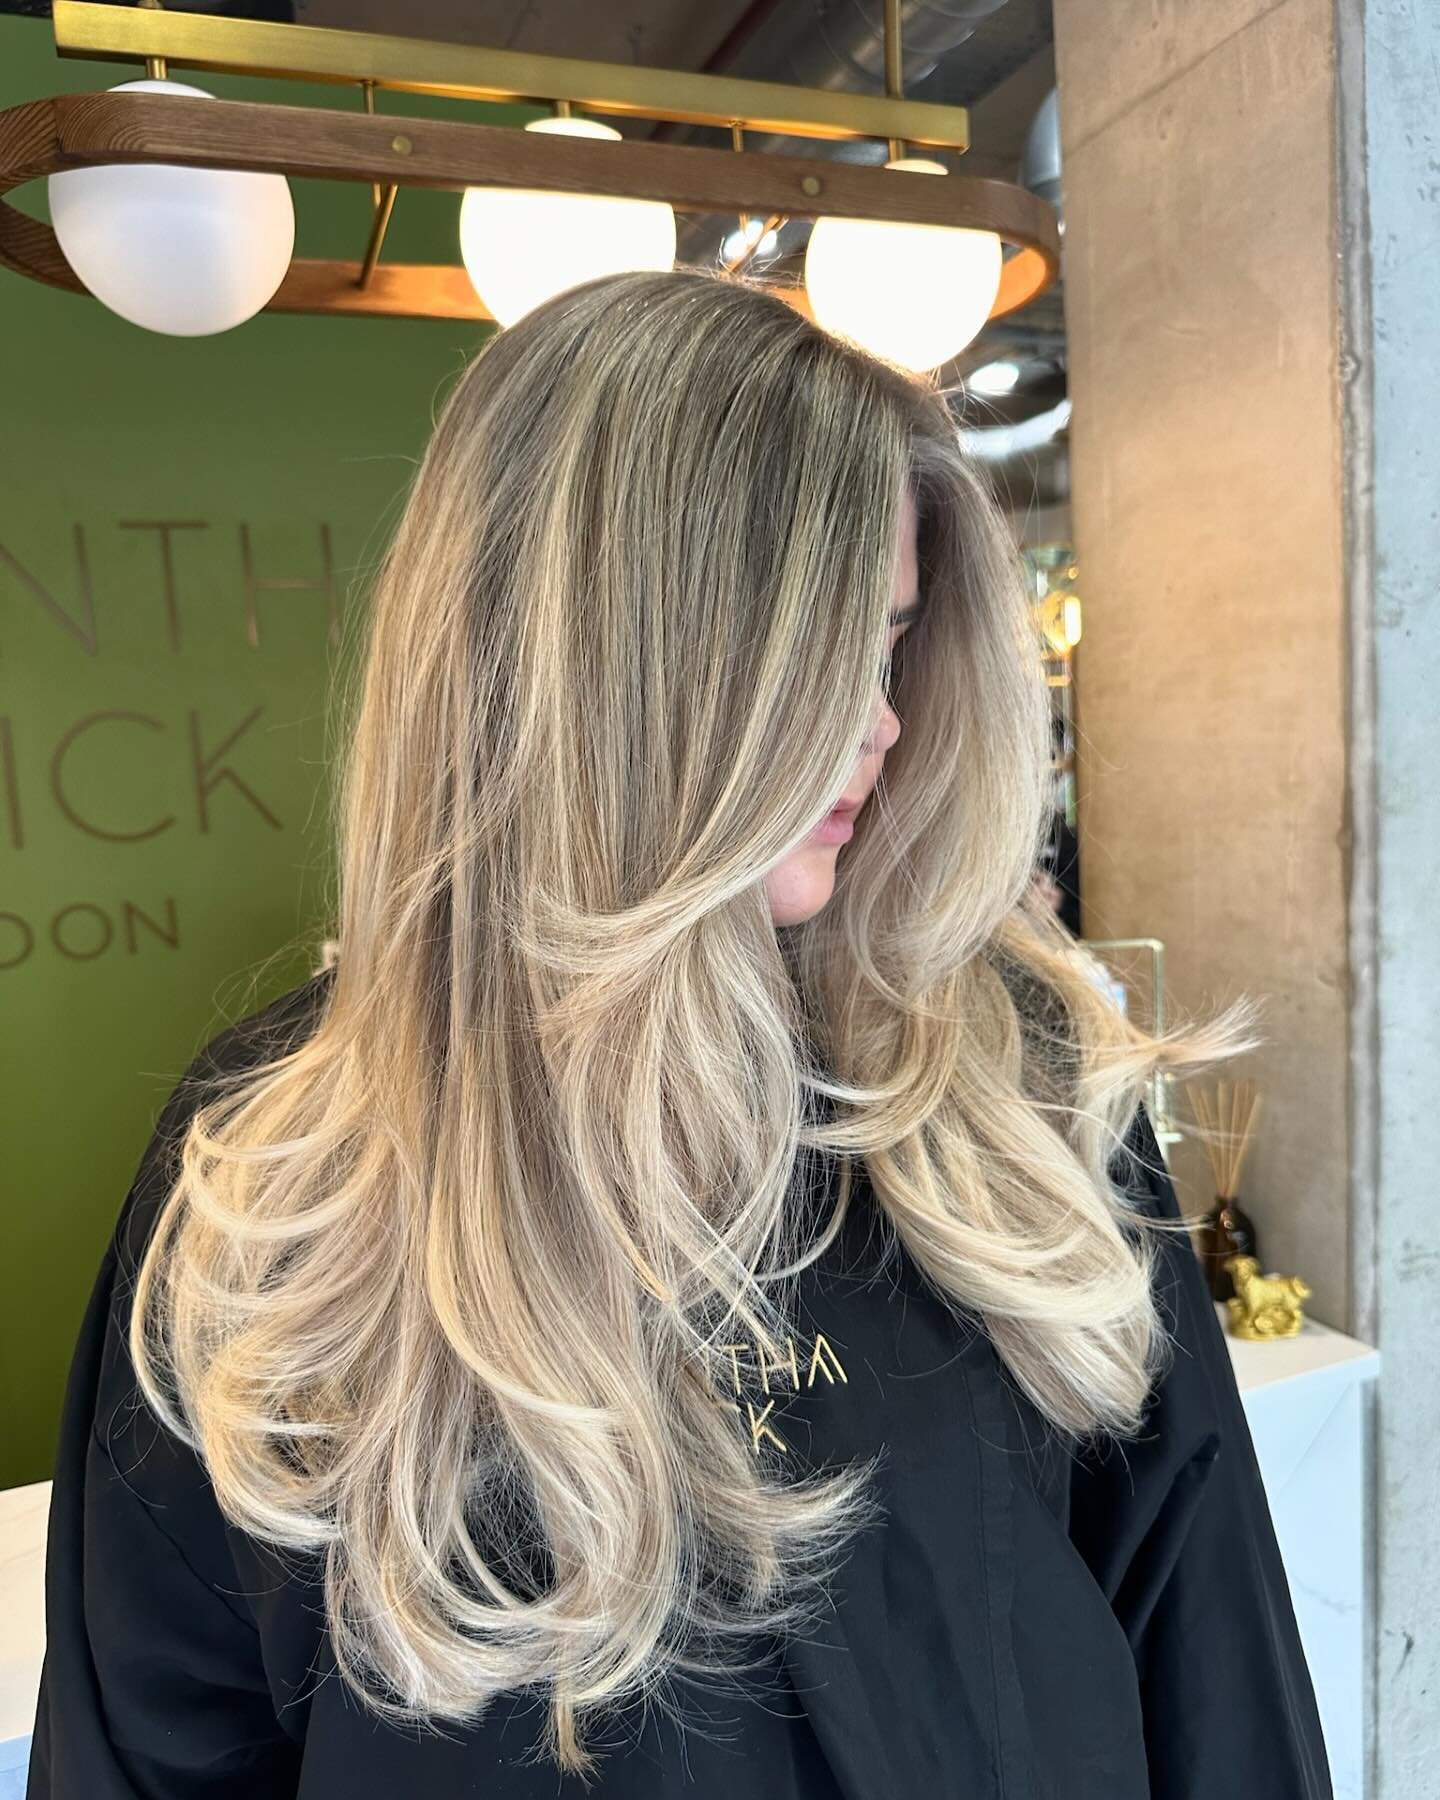 Make this bank holiday weekend unforgettable with a brand-new hairdo! 🧚 Let our hairstylist fairy godmothers work their magic on your hair while you sit back and relax 😍

Created by our senior colourist Katie (@_colourbykatie) in our Fitzrovia salo